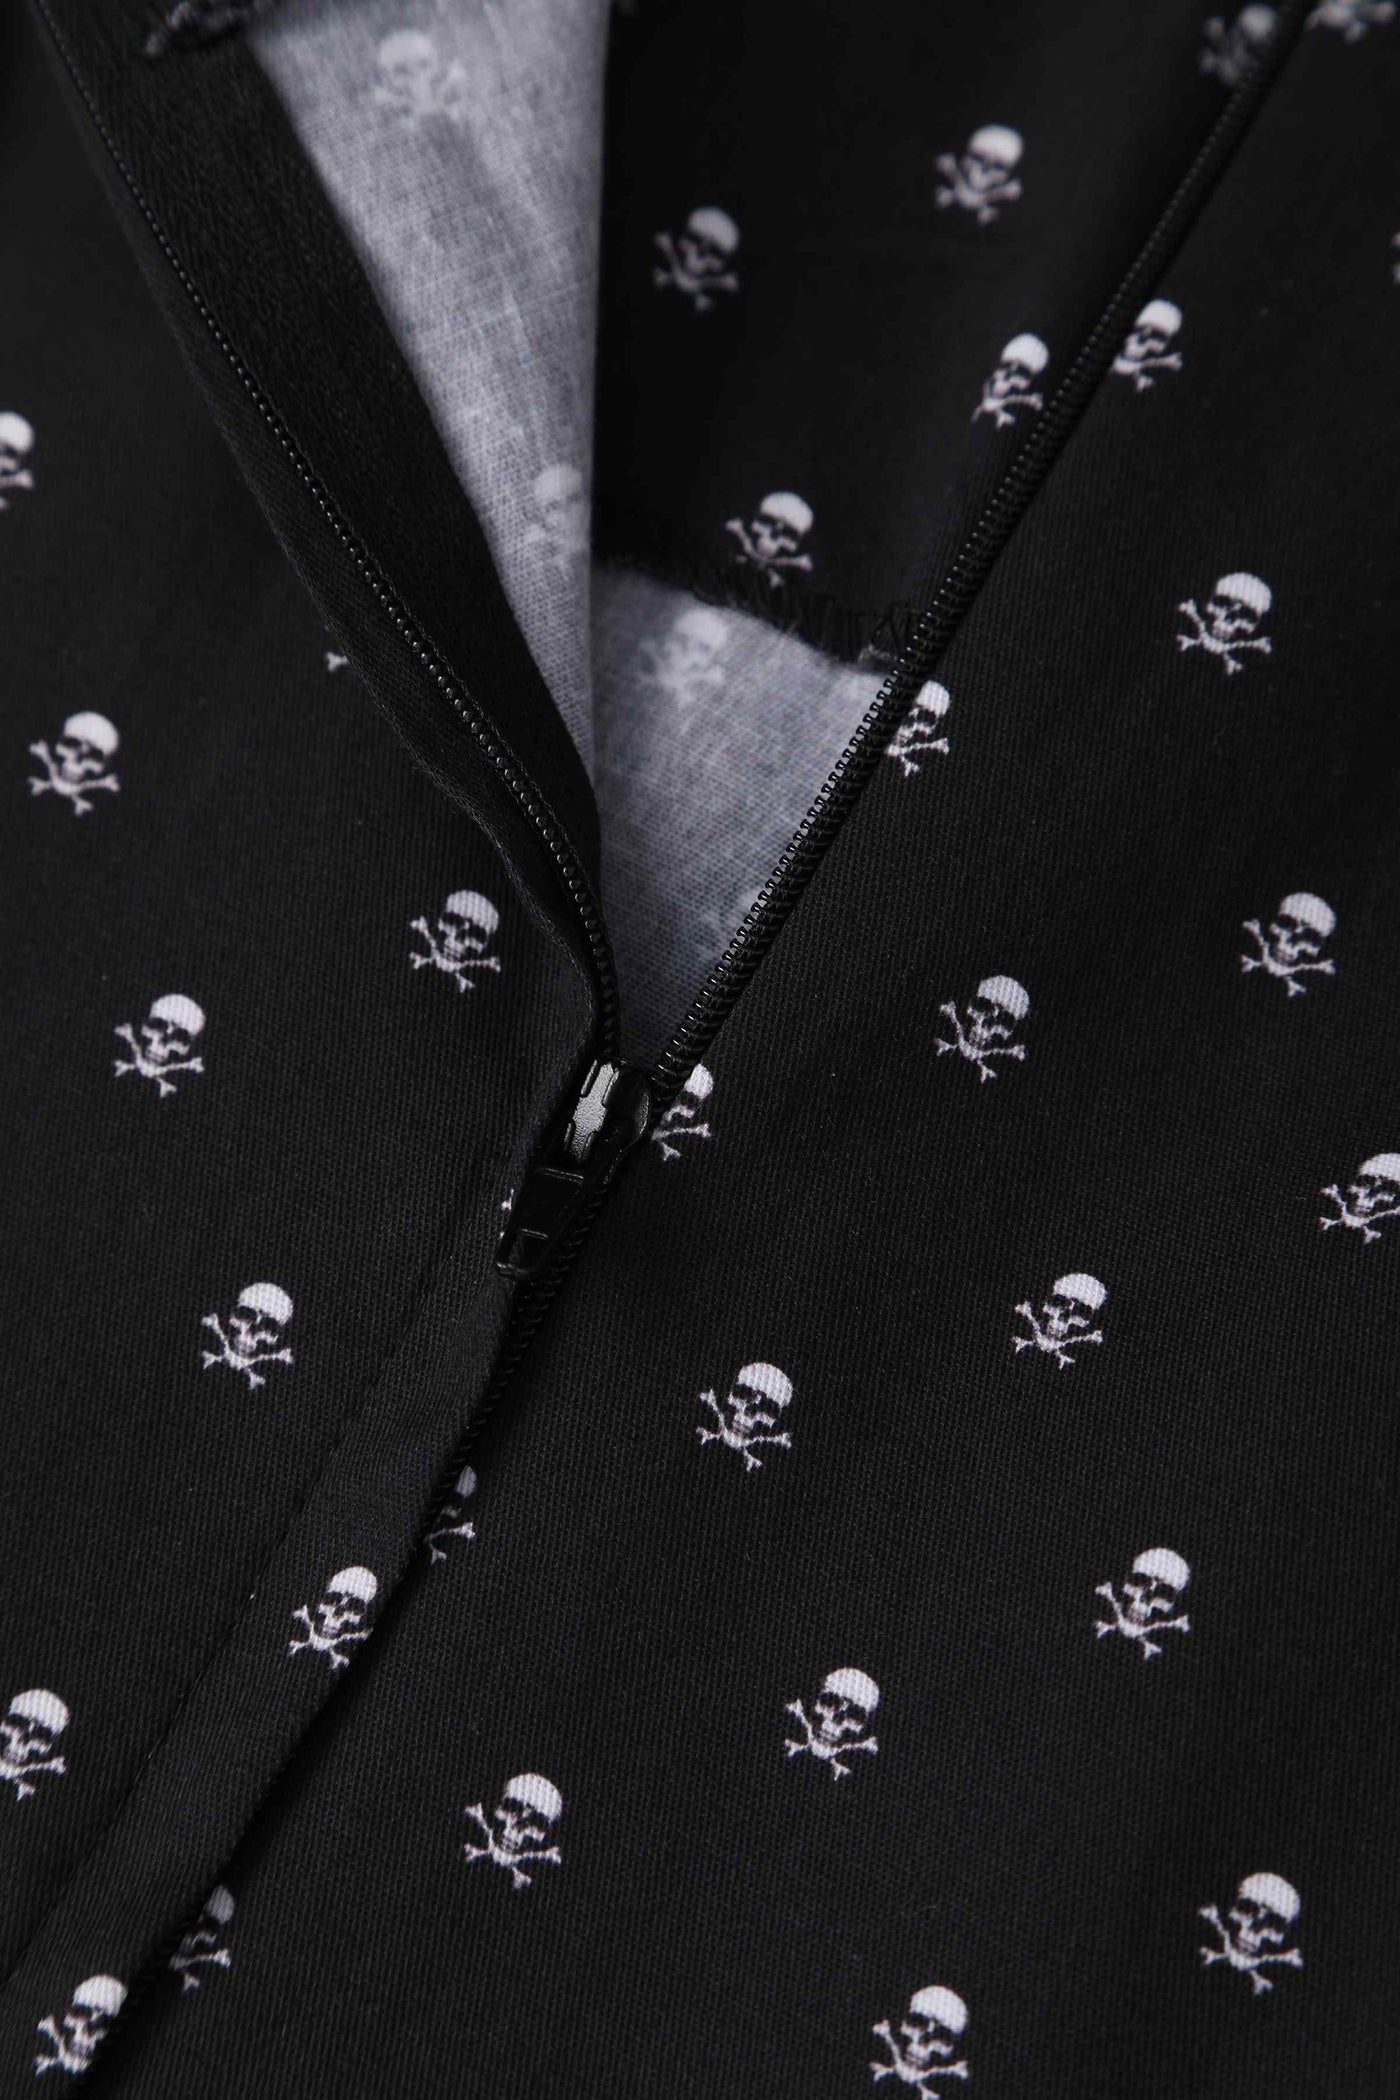 Close up view of black skull print vintage style swing dress